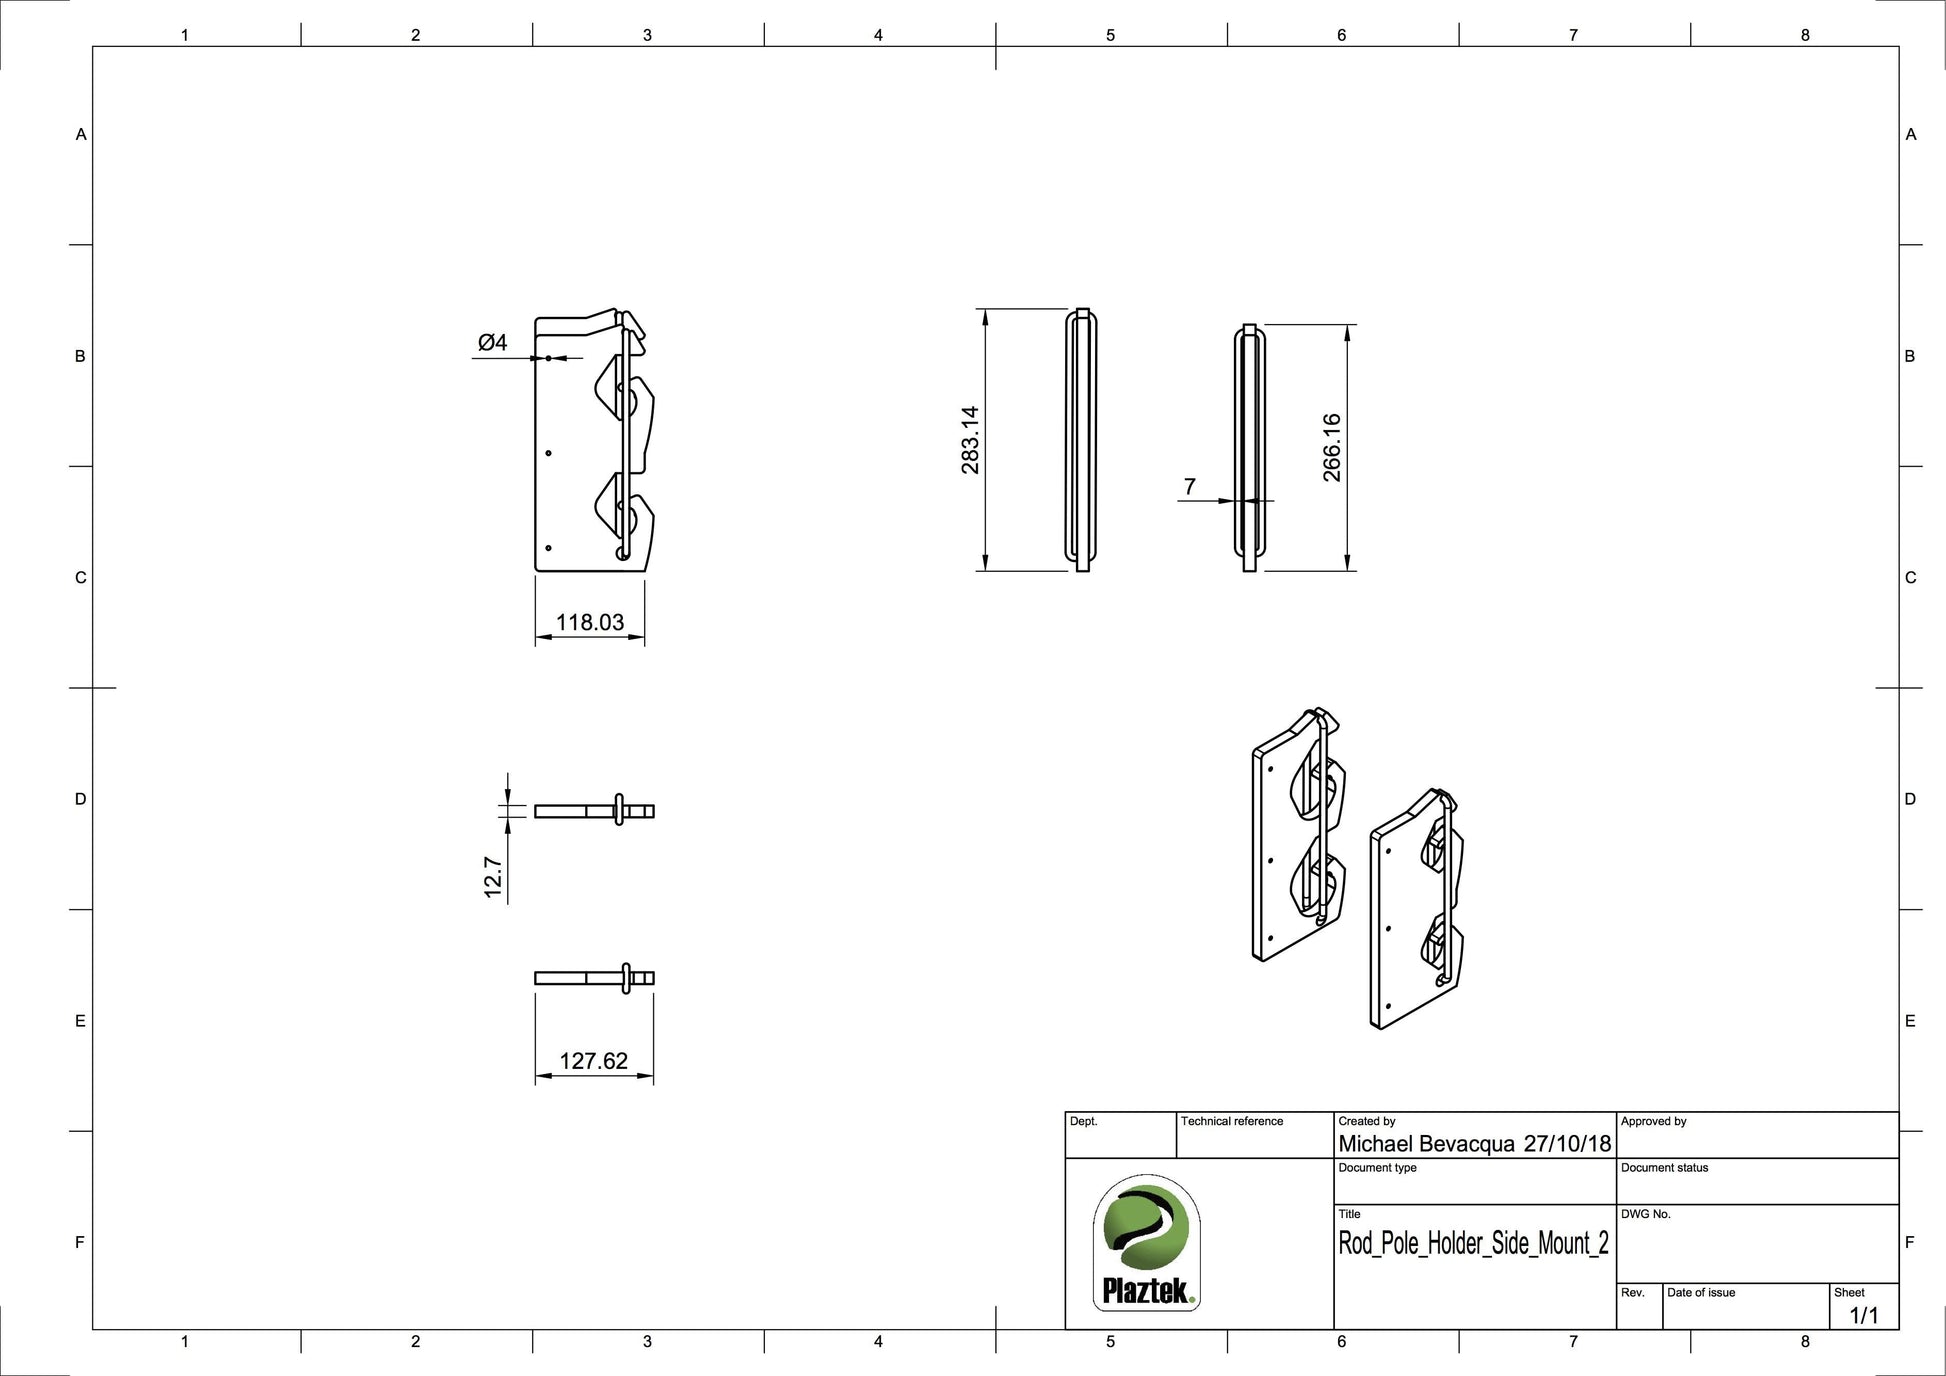 CAD drawing with measurements. Made in Australia.